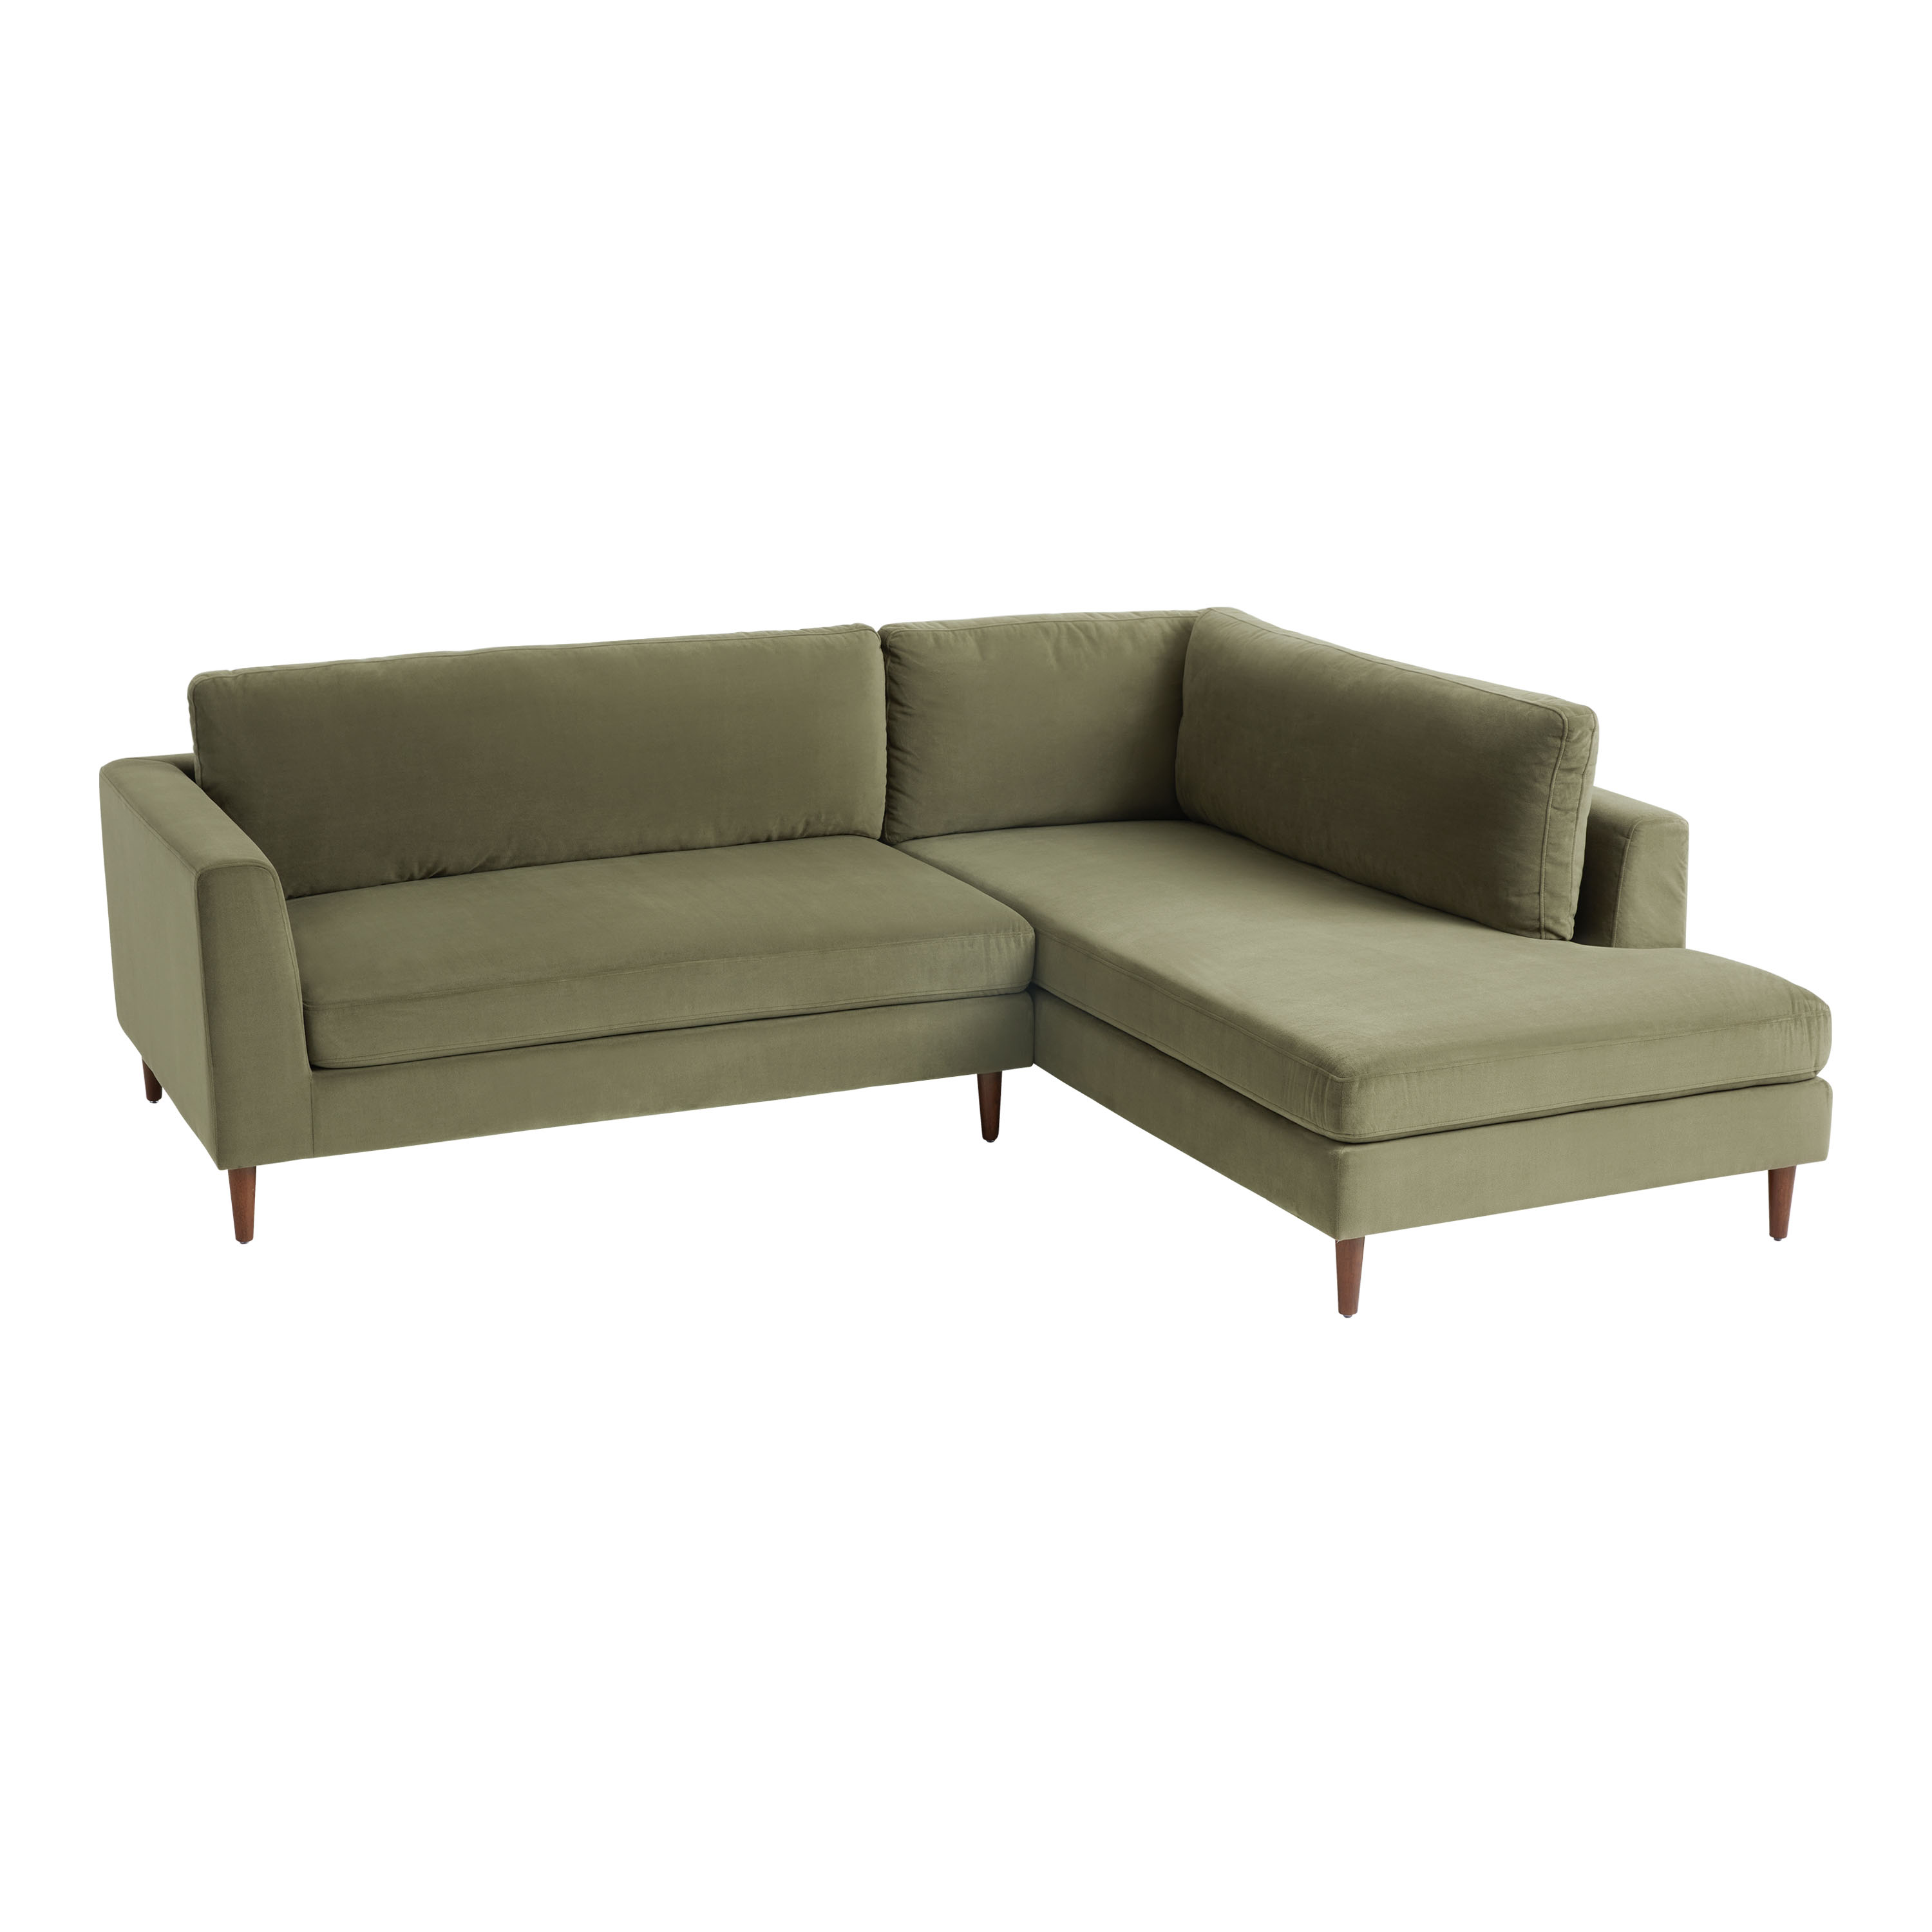 Artisan L-Shaped Sofa for Entertainment Room Seating